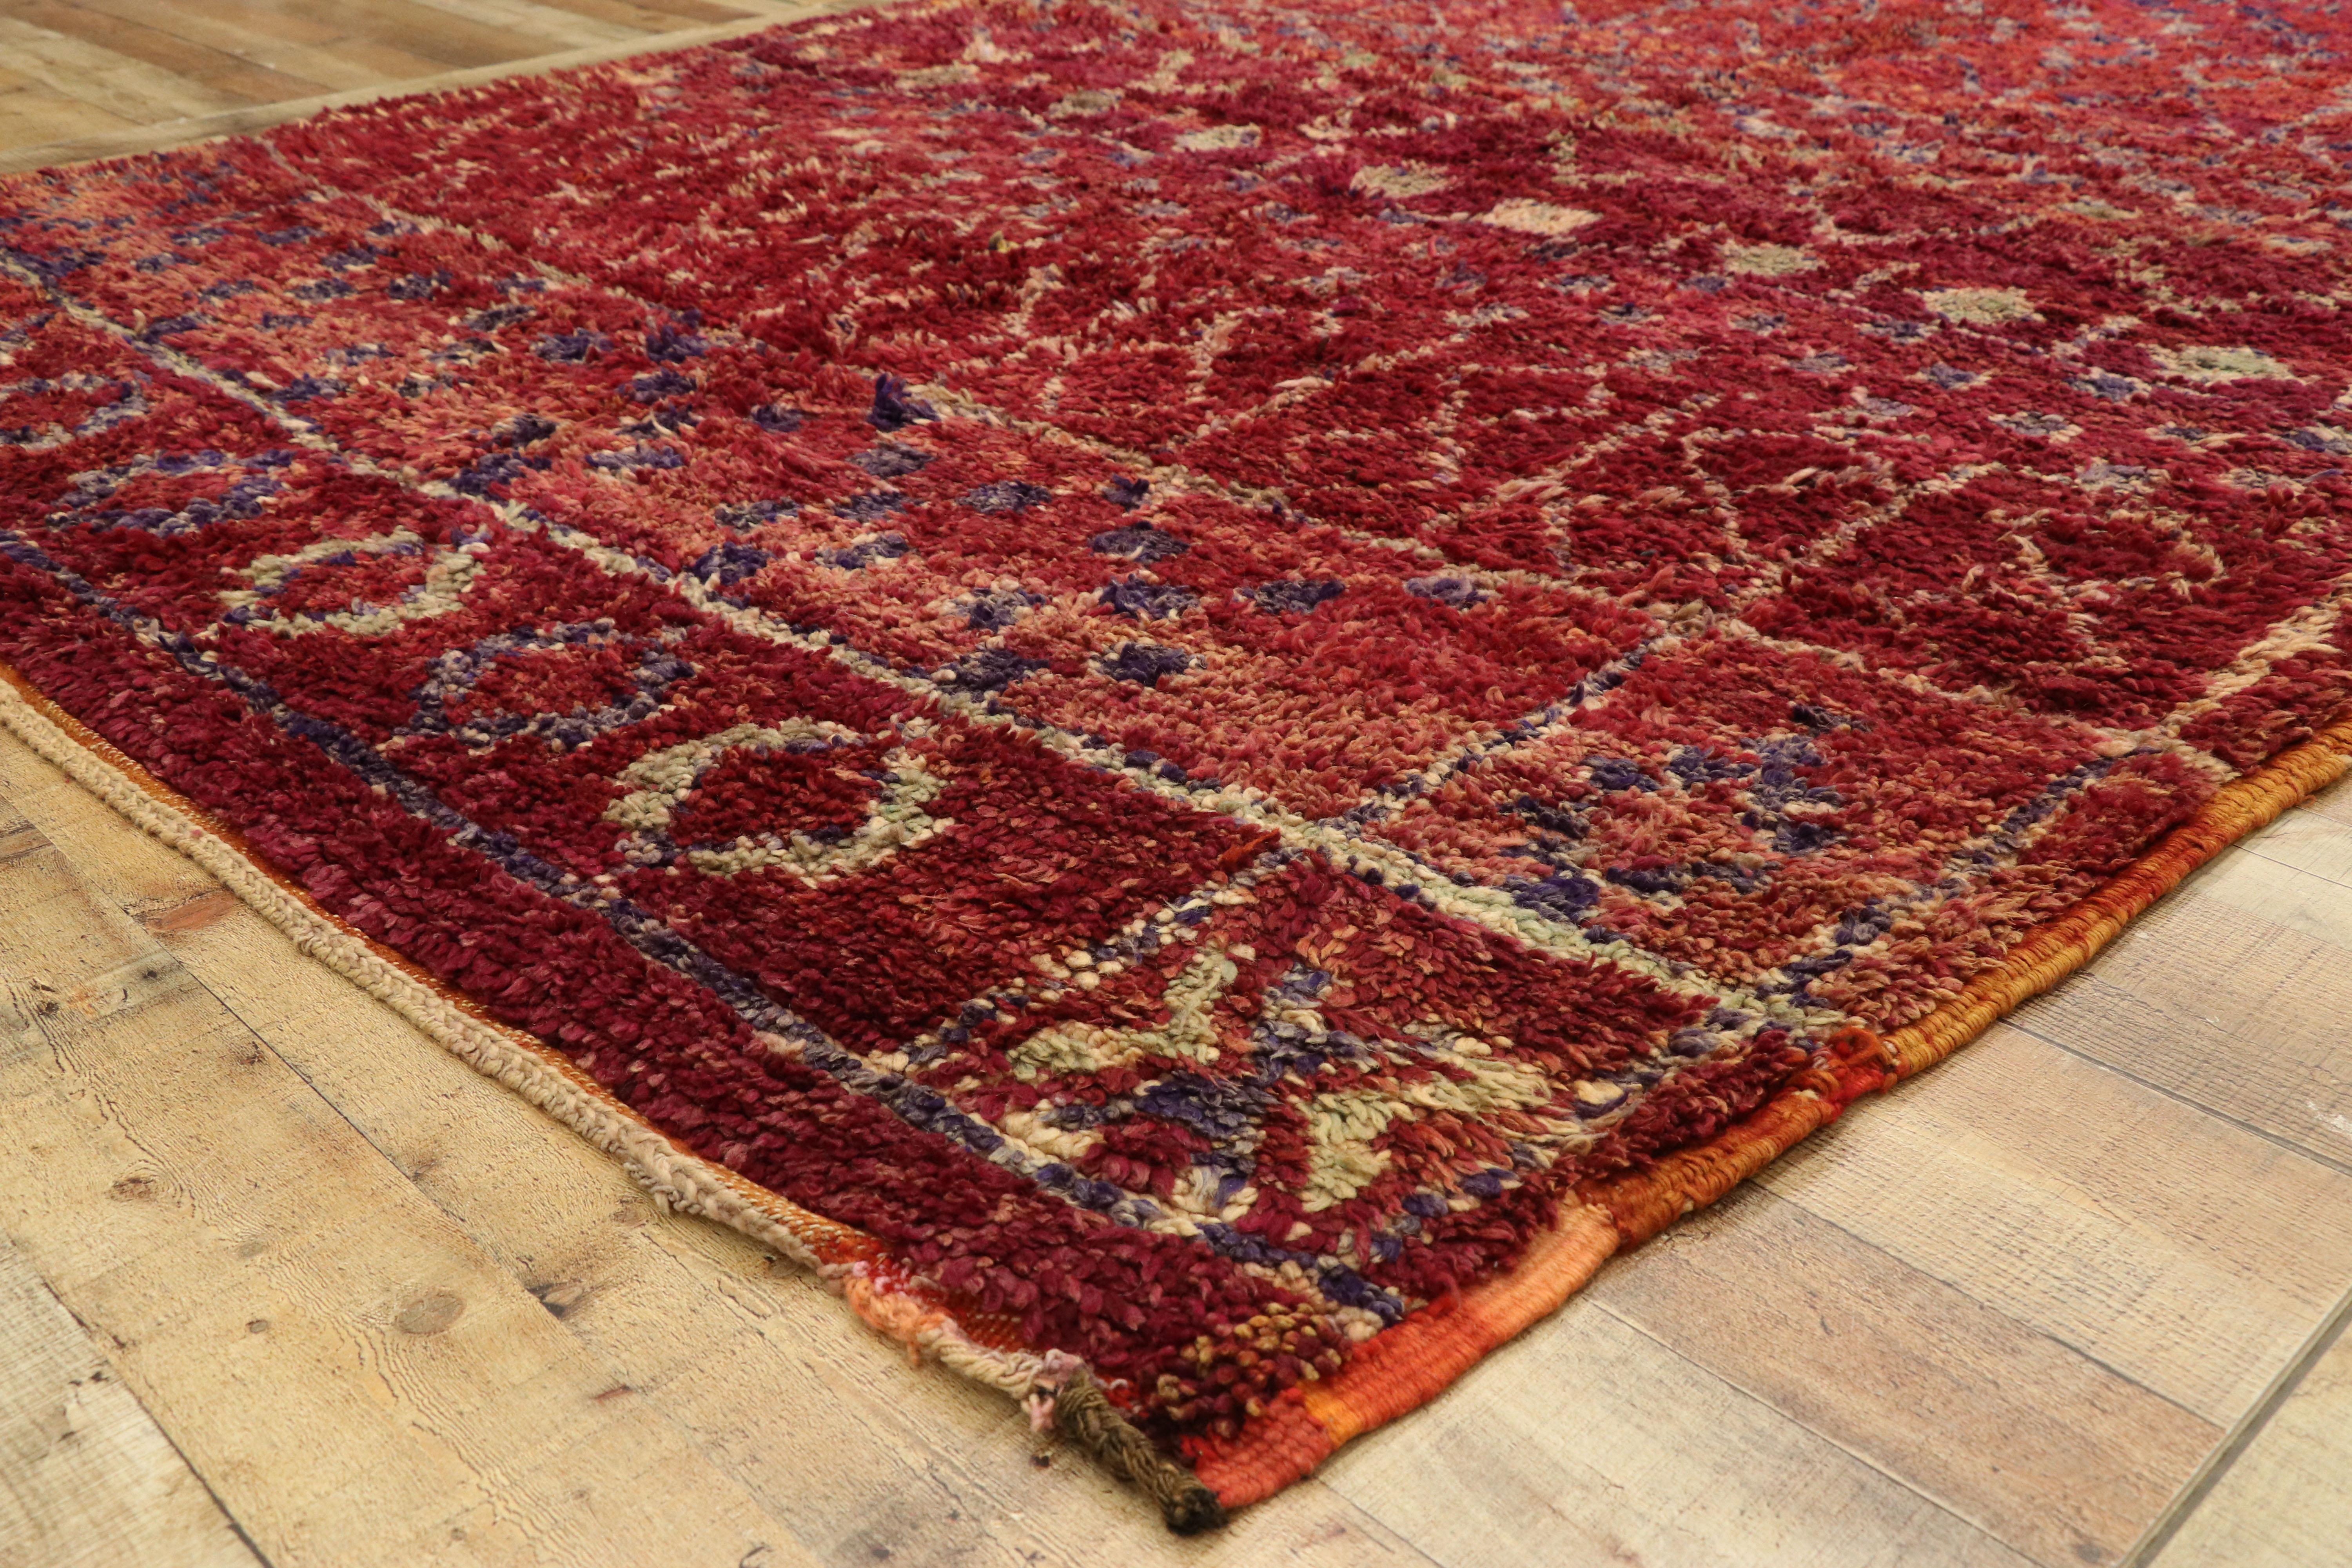 Vintage Berber Moroccan Rug with Postmodern Boho Chic and Memphis Style In Good Condition For Sale In Dallas, TX